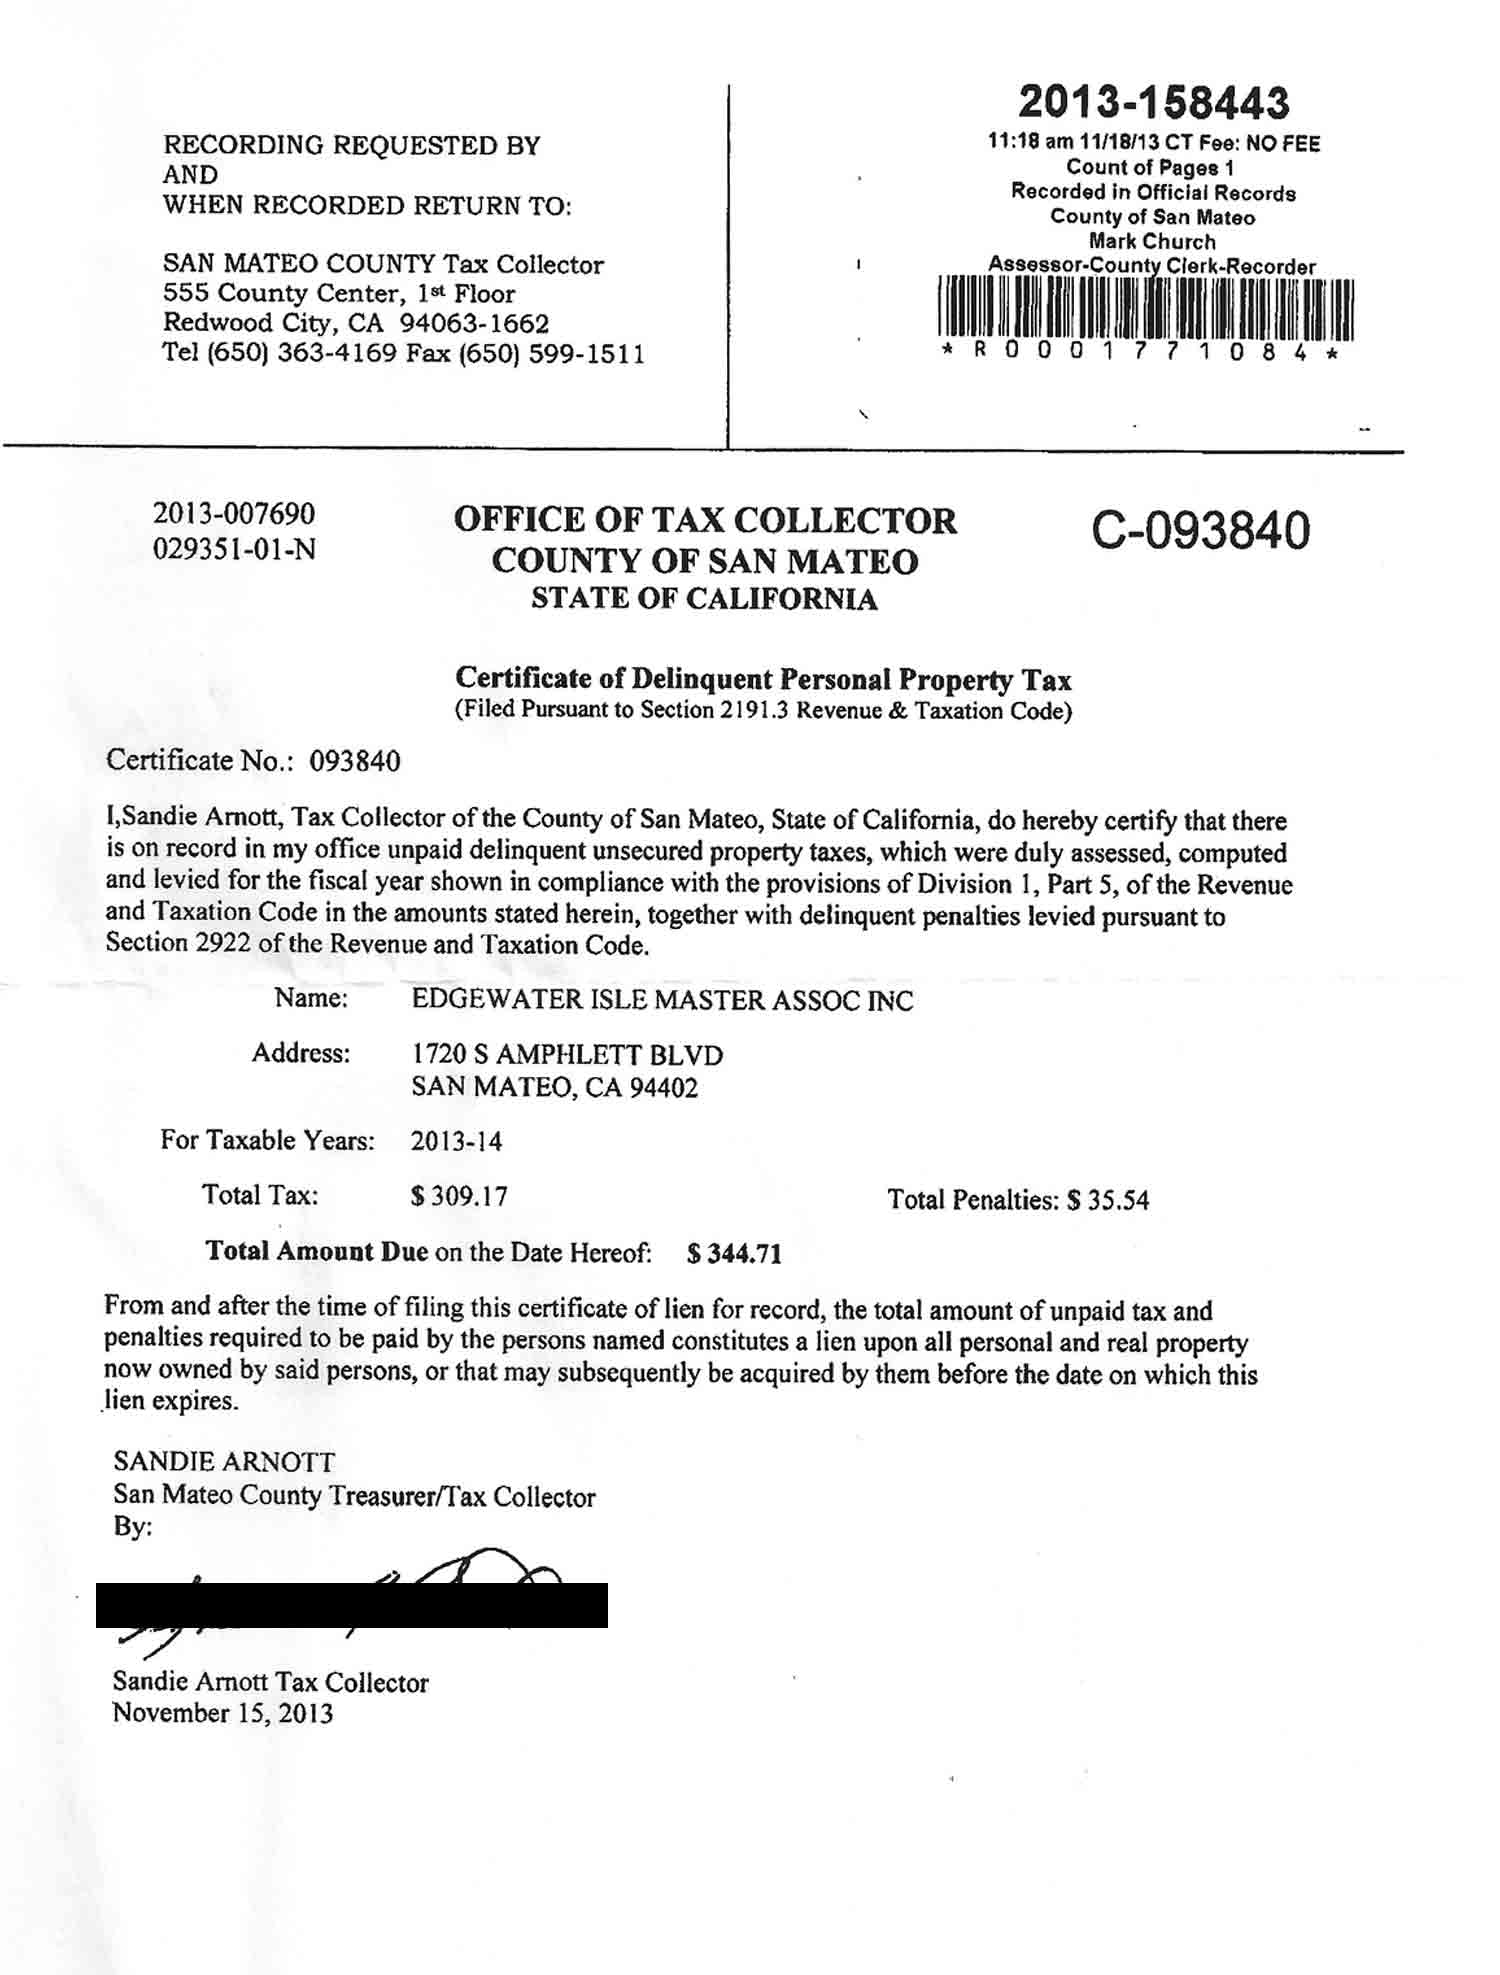 Edgewater Isle Master Association hit with another lien by San Mateo County in 2013